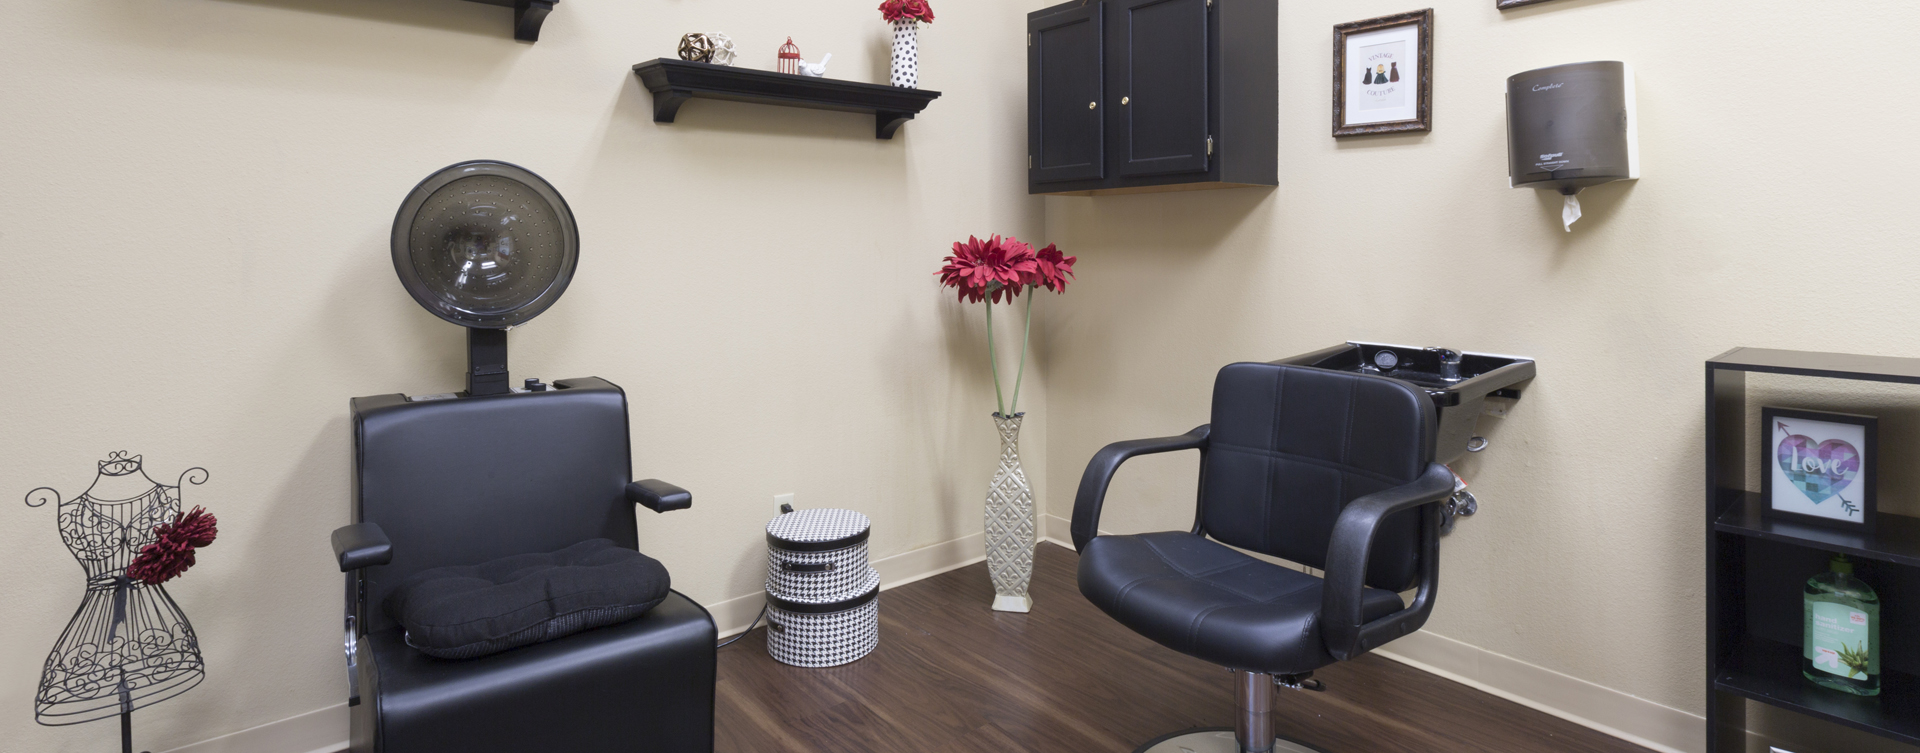 Strut on in and find out what the buzz is all about in the salon at Bickford of Omaha - Hickory